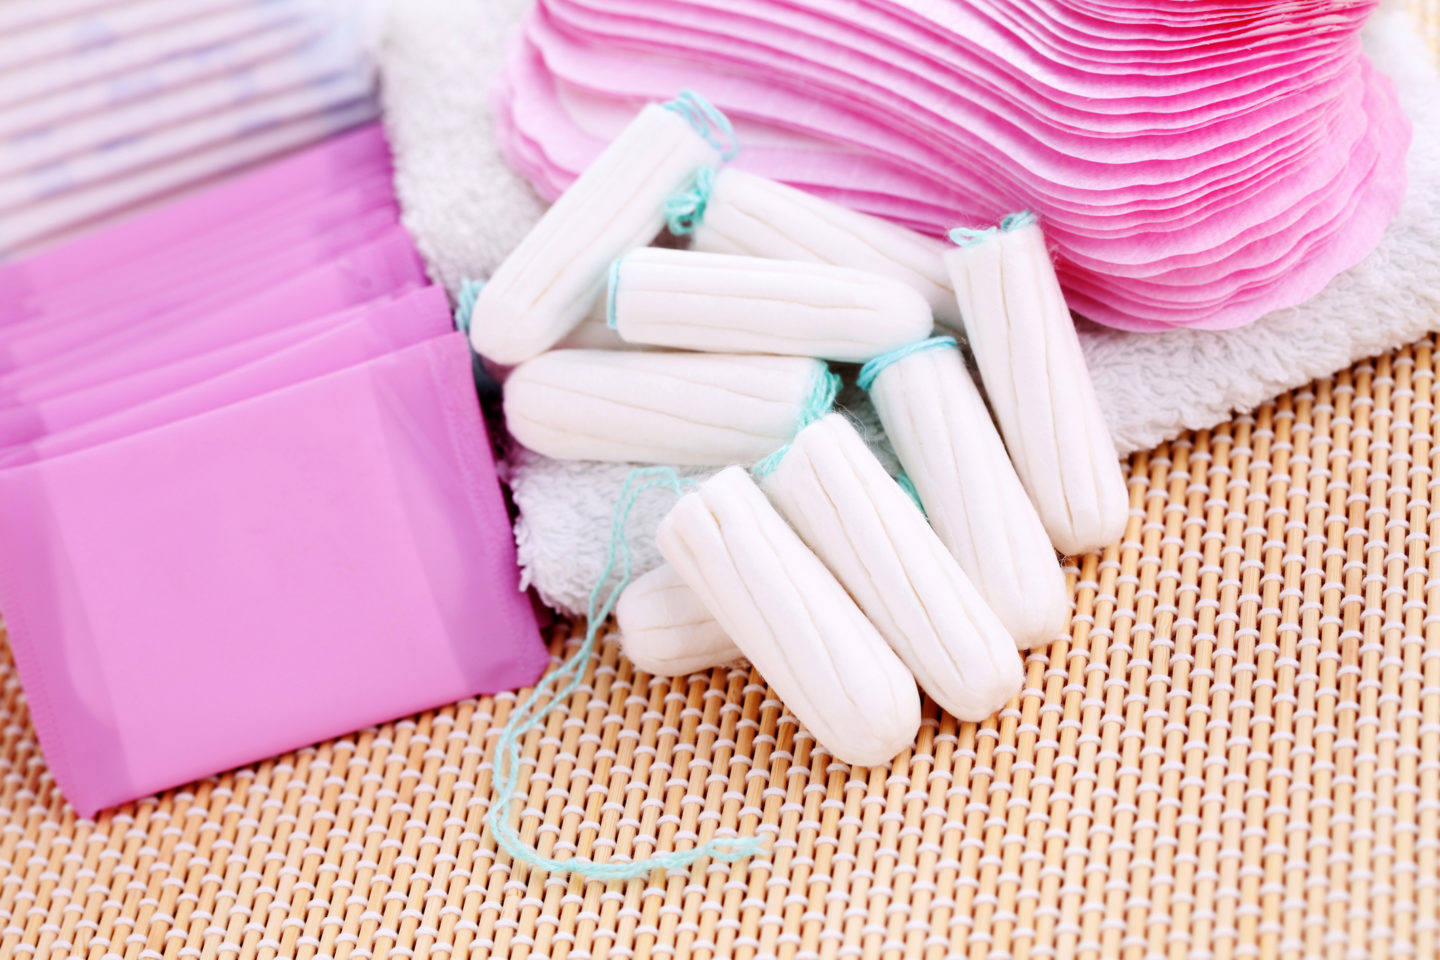 This Teacher Helps Normalize Menstruation By Keeping Menstruation Care Packs In Her Classroom